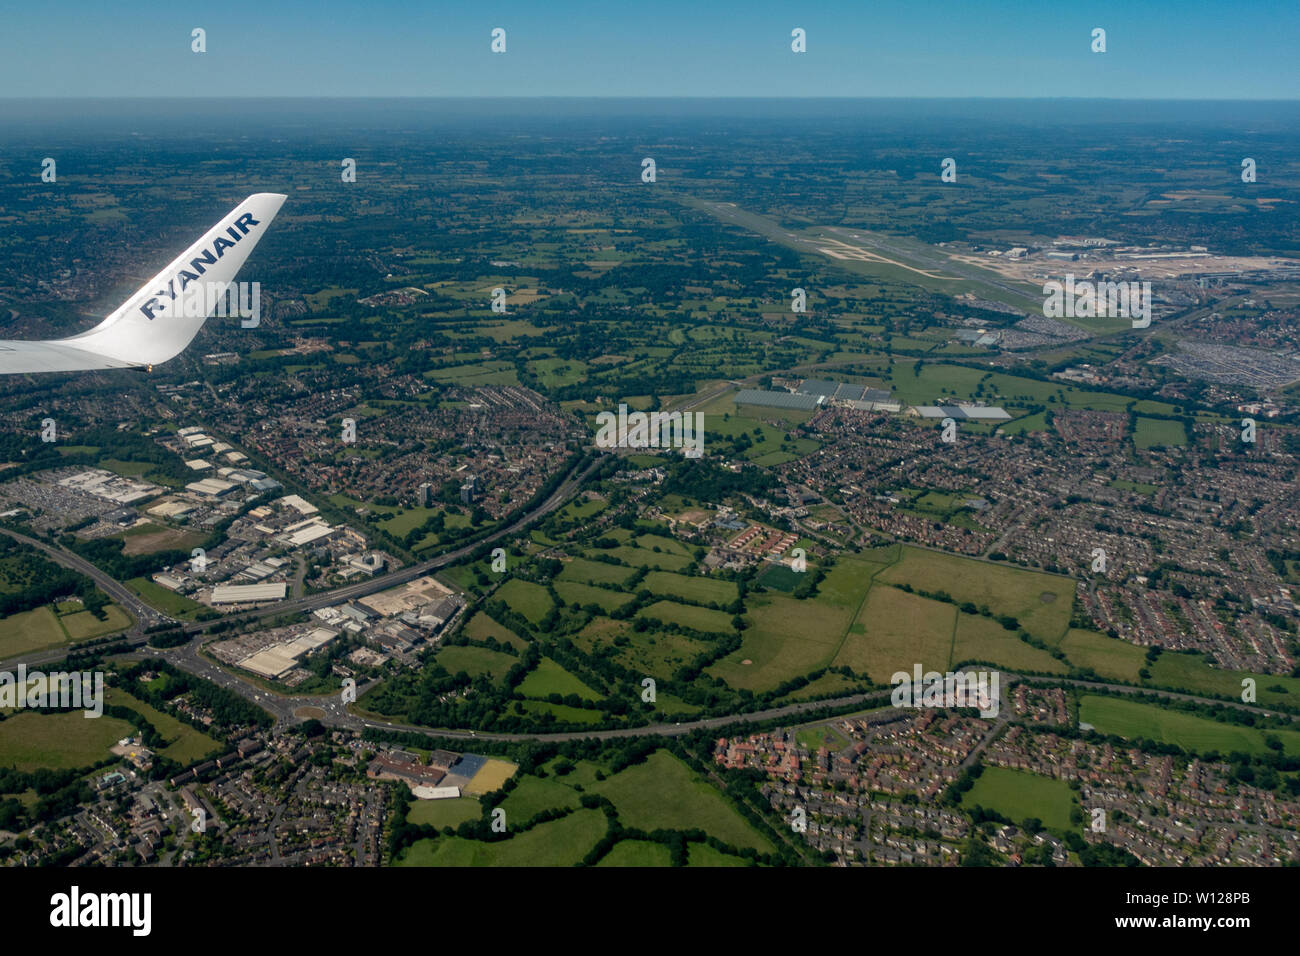 Aerial photograph of Manchester Airport from above with pilots viewpoint Stock Photo